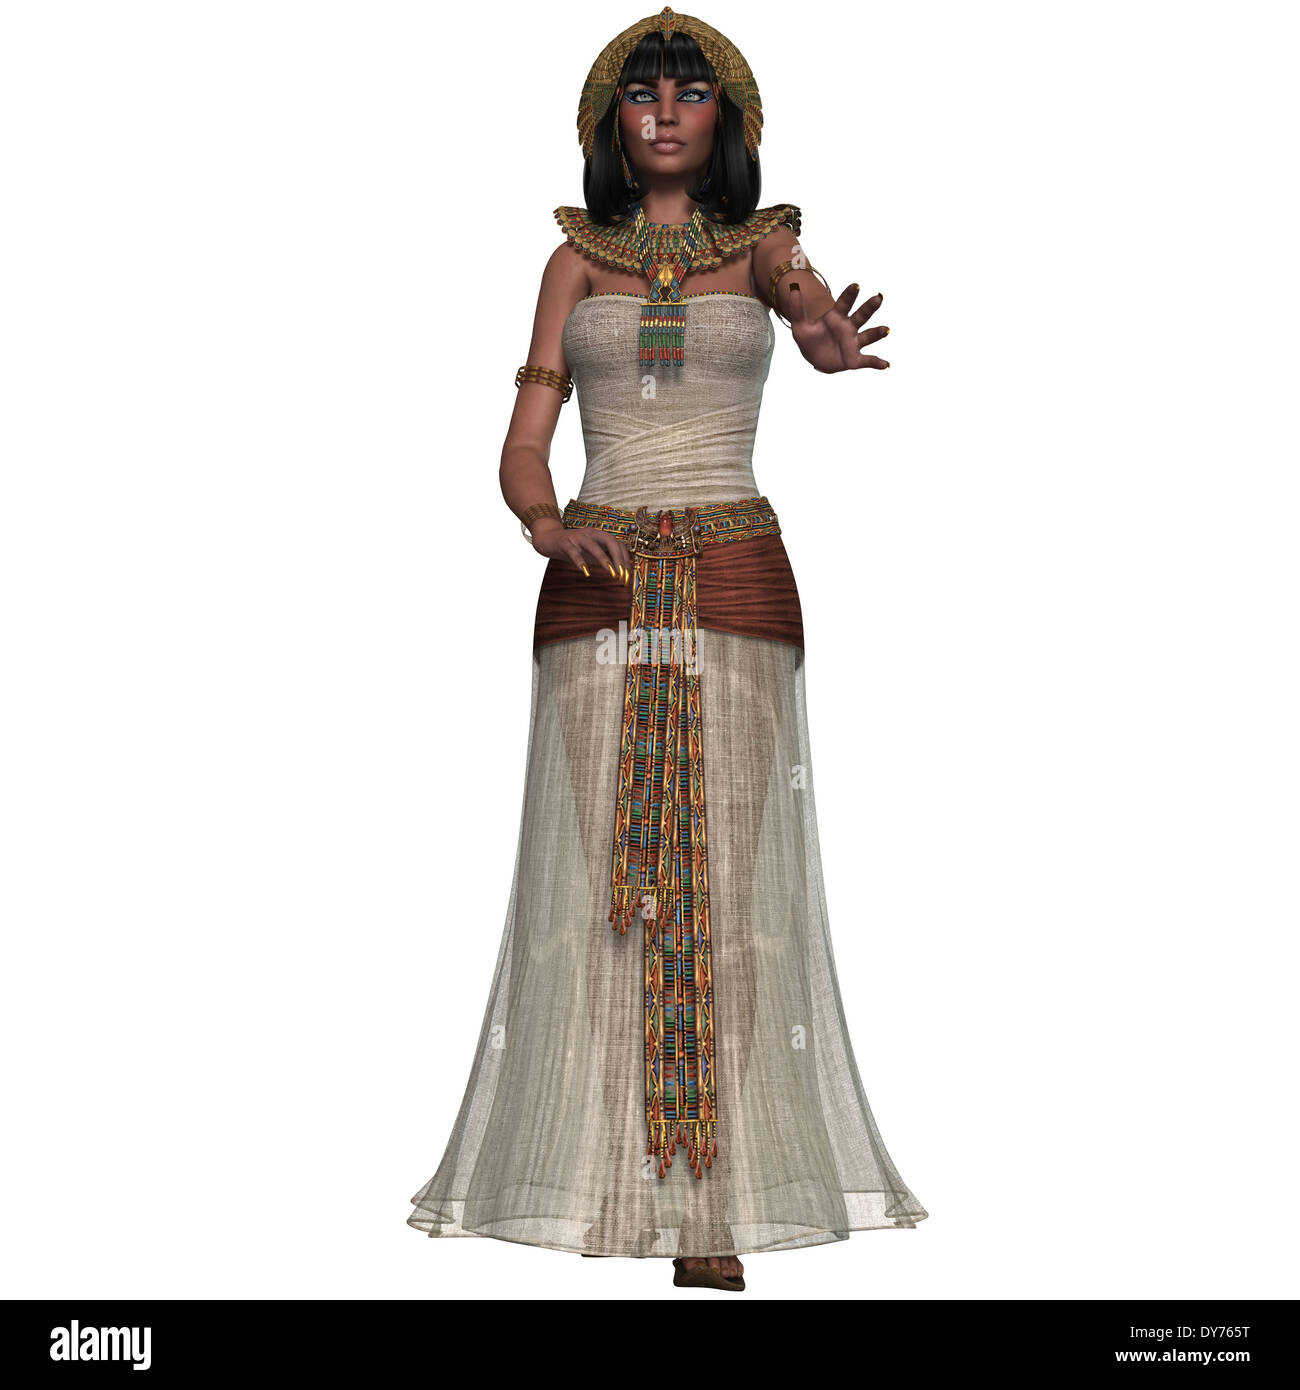 An Egyptian Lady With Traditional Clothing From The Old Kingdom Of